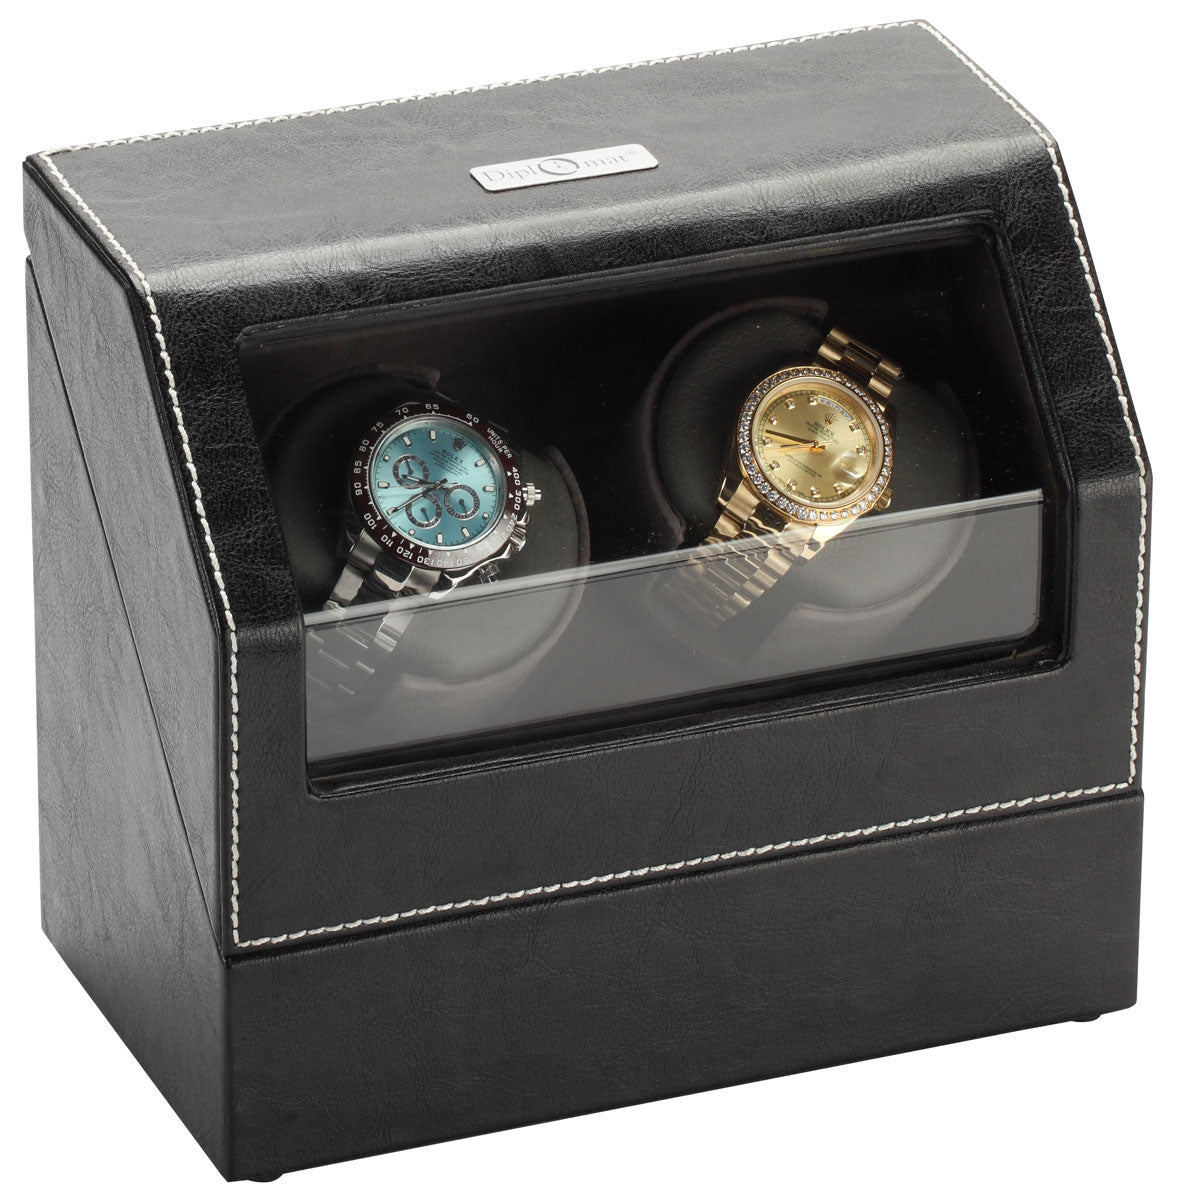 Diplomat "Victoria" Double Watch Winder in Onyx & Charcoal